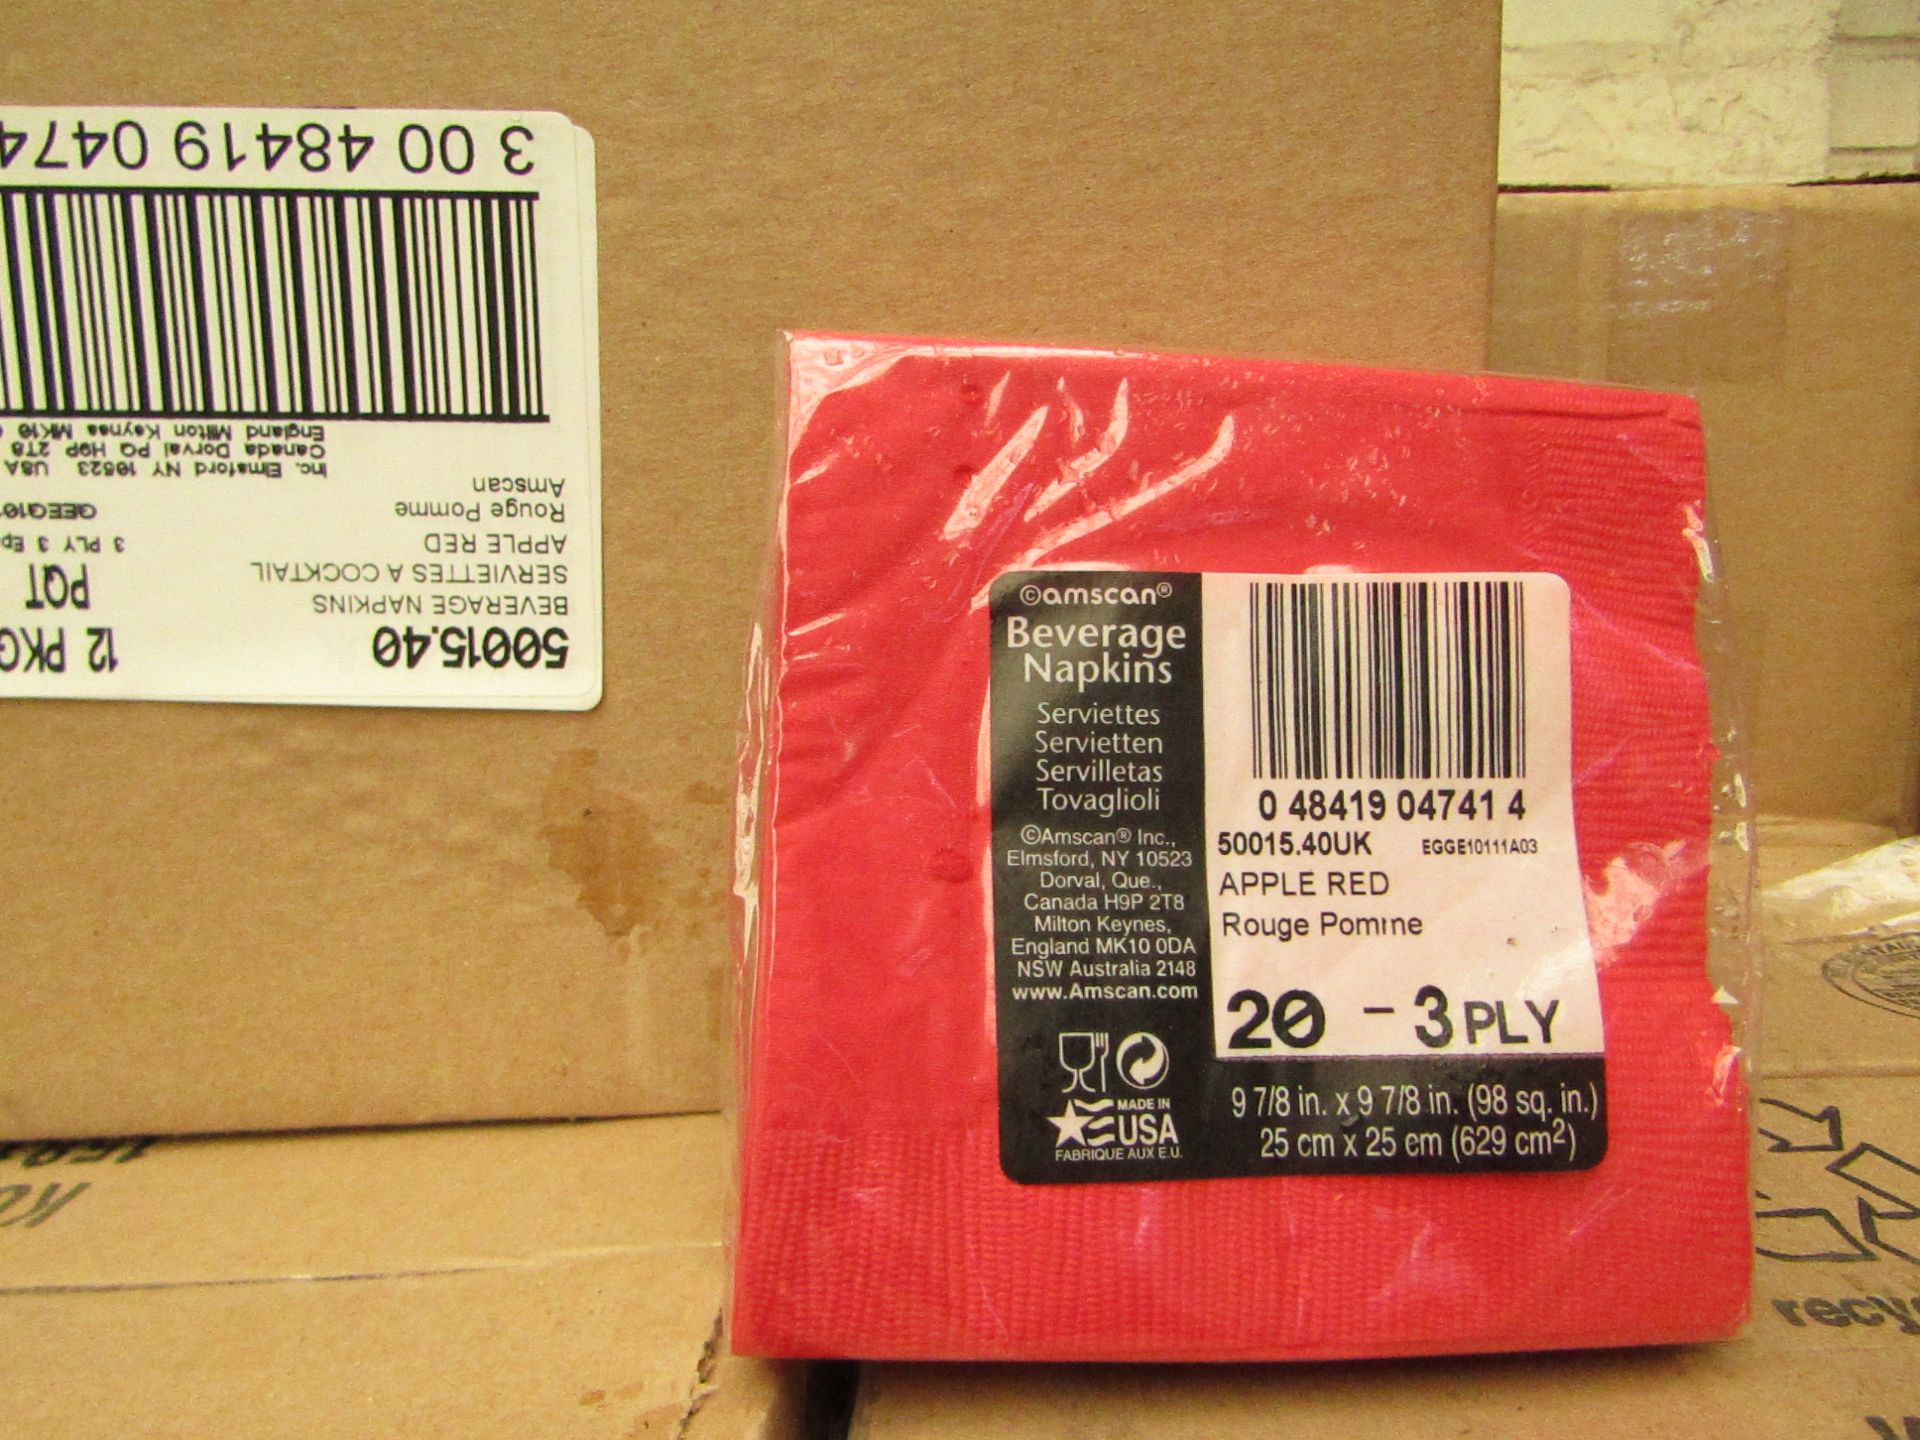 Amscan - Apple Red Beverage Napkins ( Box of 12 Packs ) - New & Packaged.